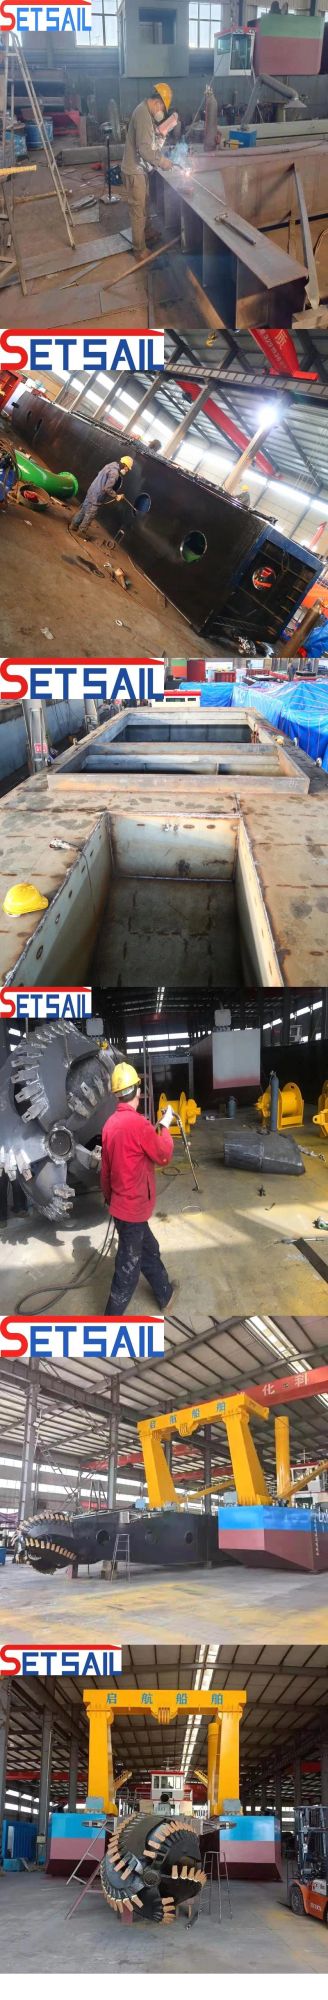 Made in China Cutter Suction Dredging Equipment with Underwater Pump